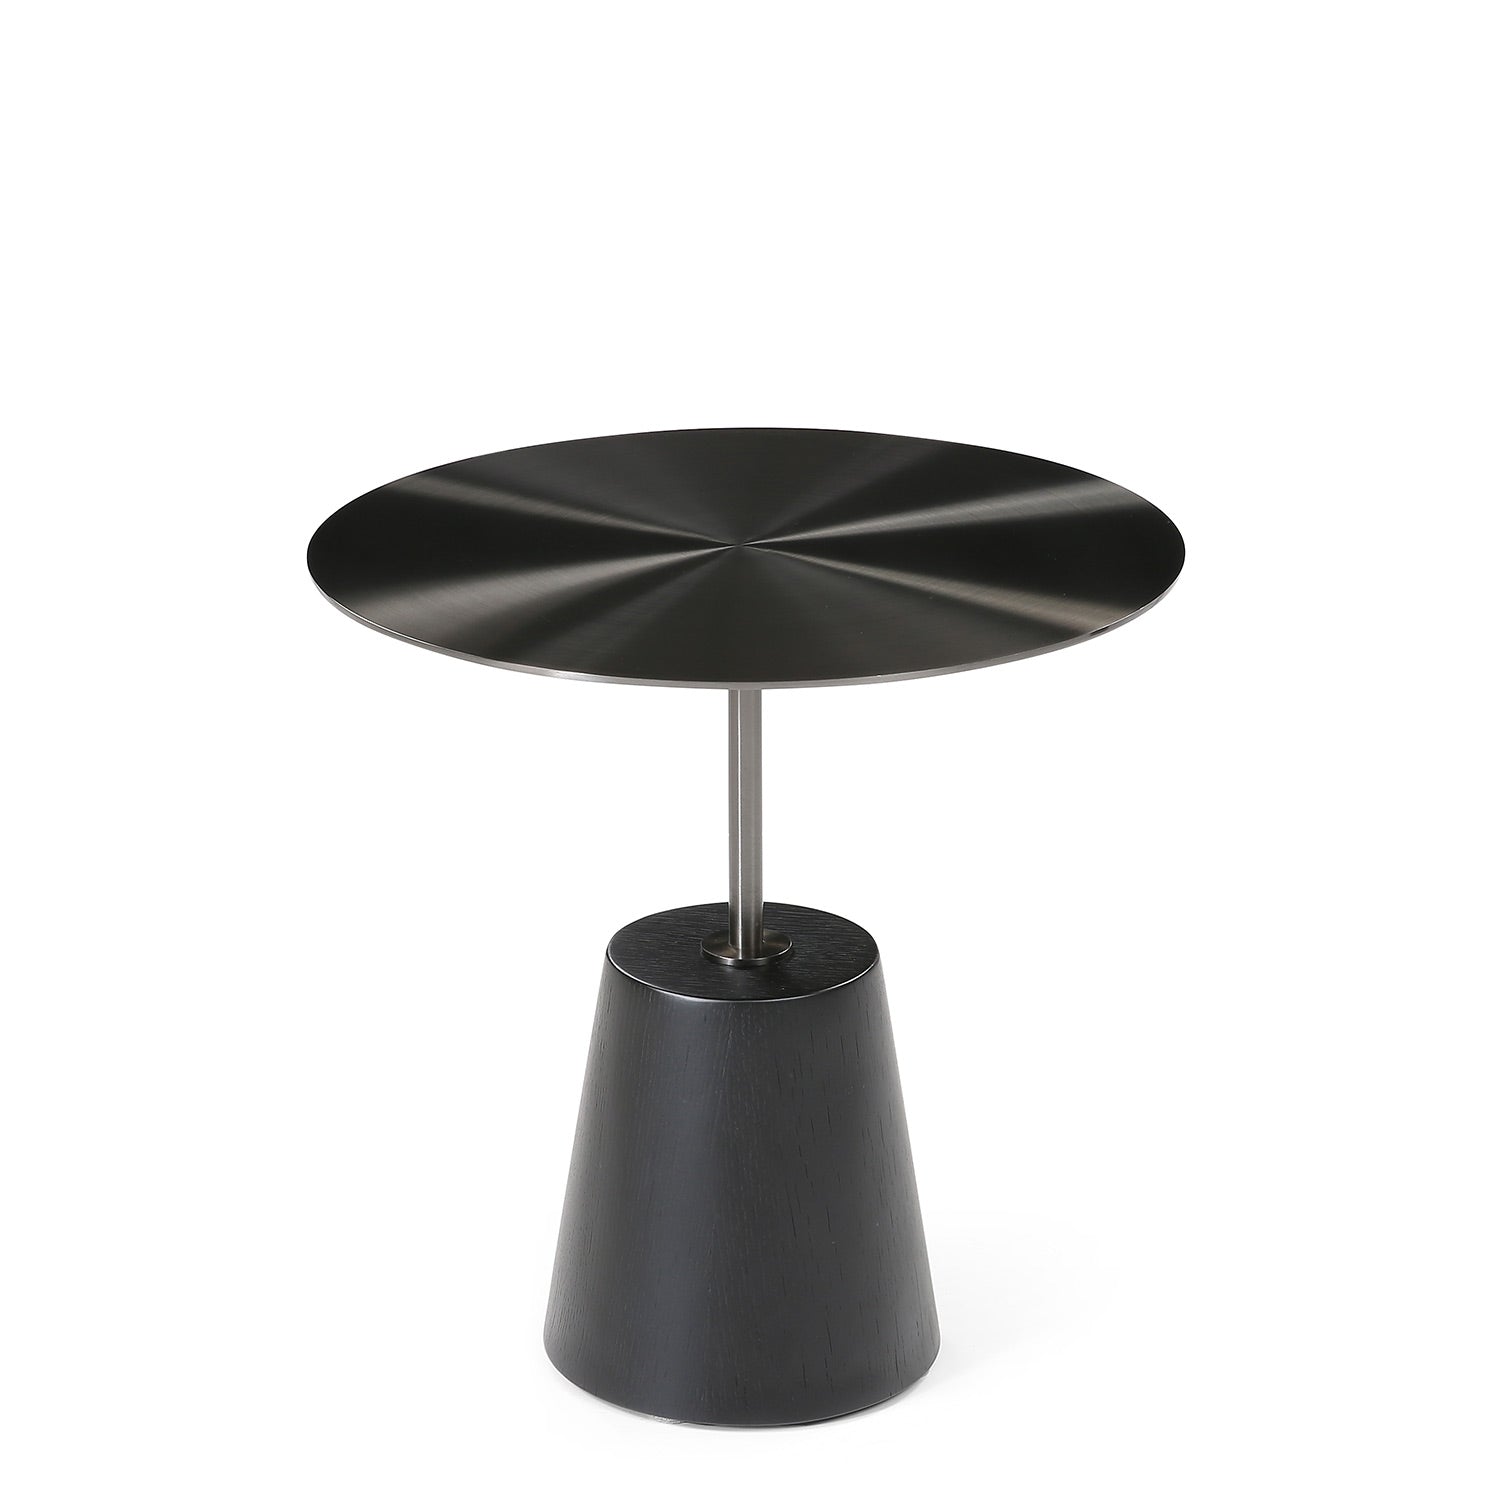 Ardenza side table